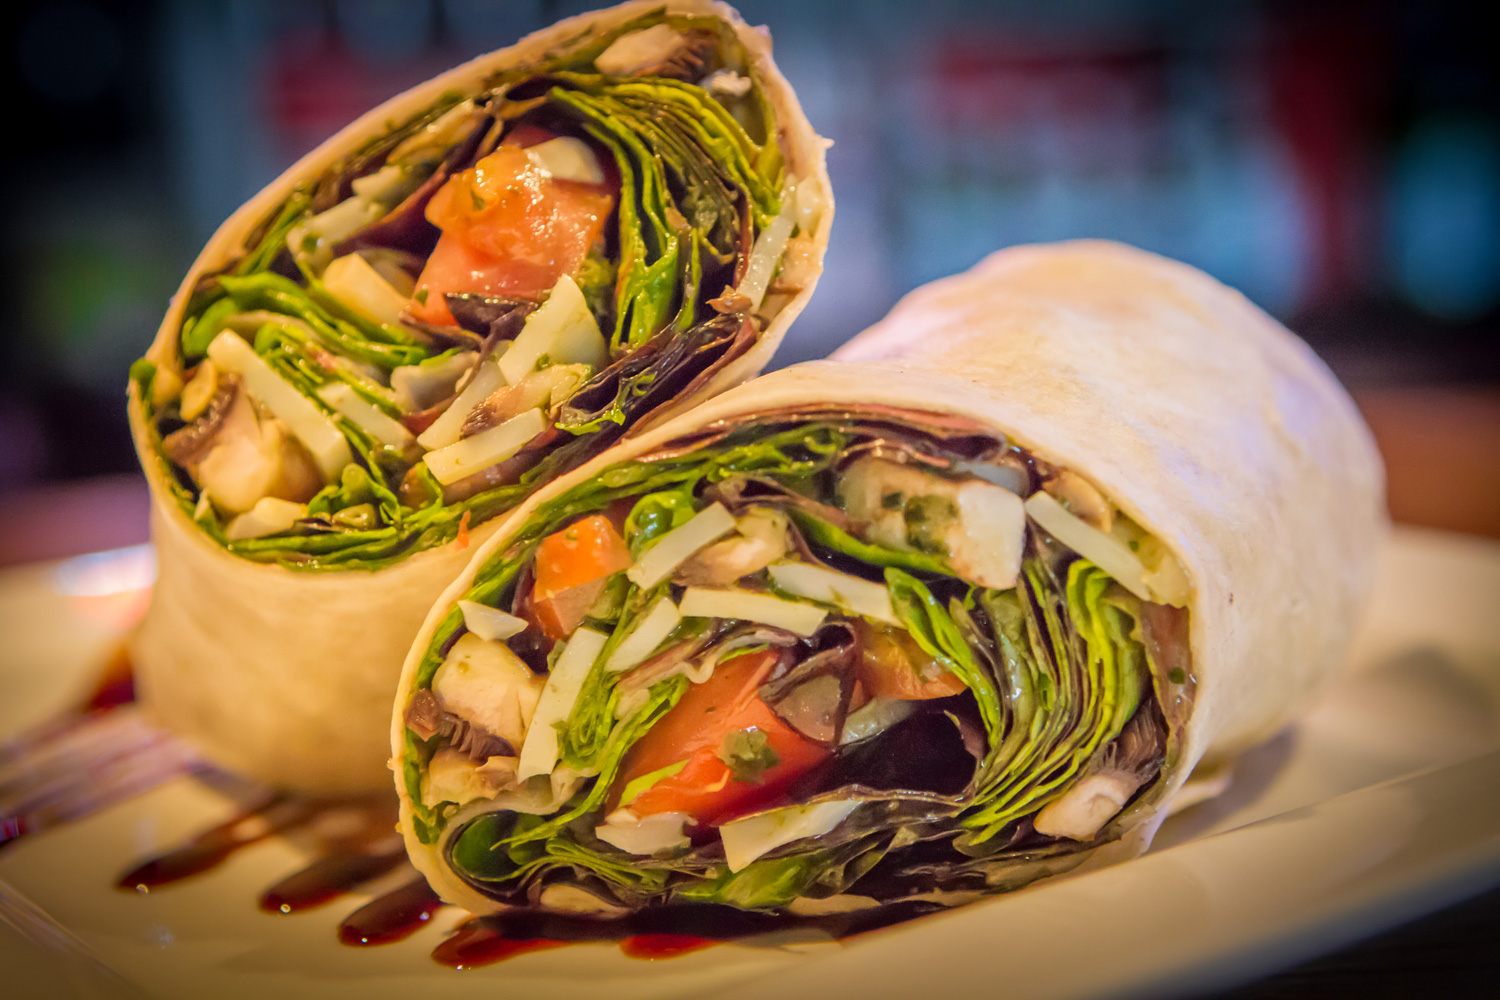 Al Carbon Caramelized Onion & Blue Cheese with Chicken or Beef Wrap